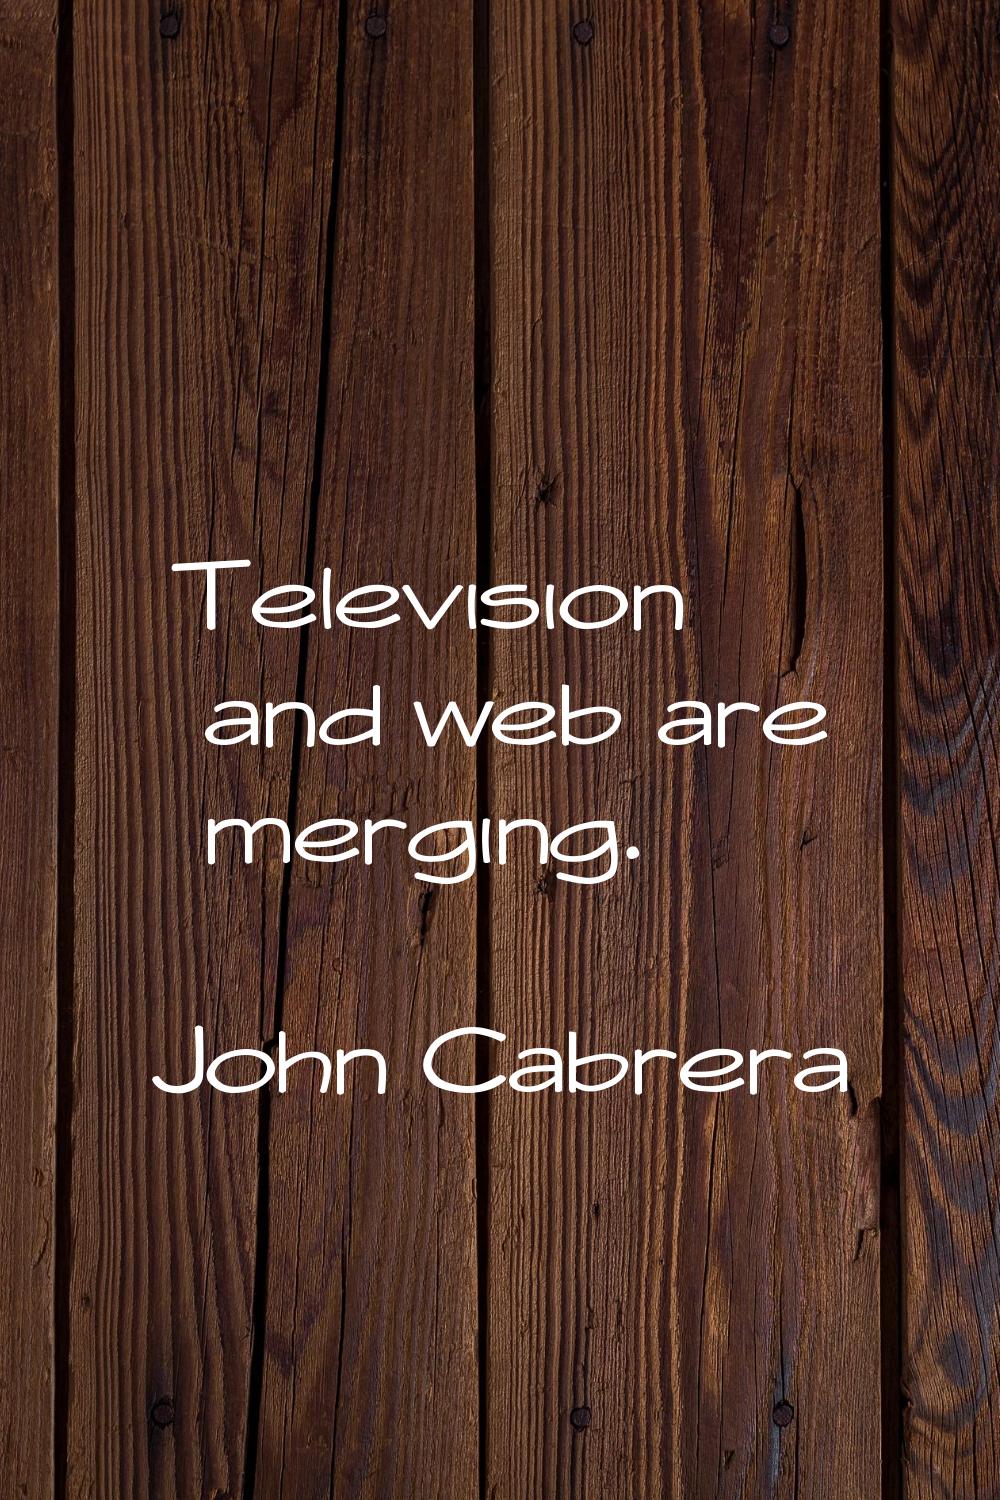 Television and web are merging.